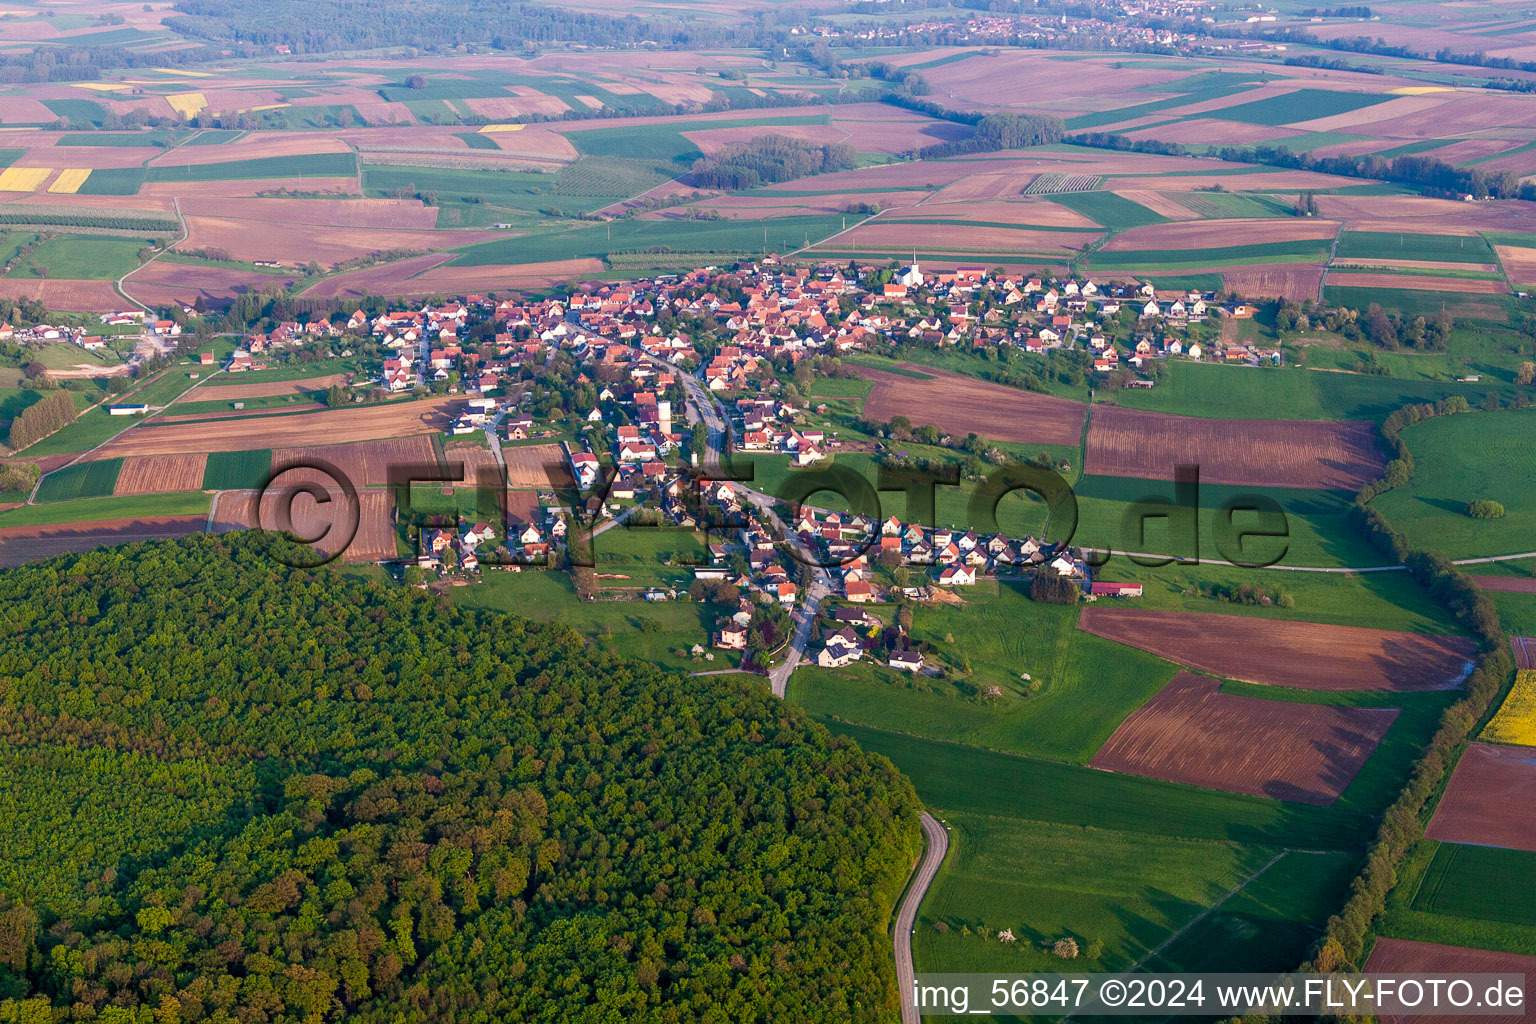 Village - view on the edge of agricultural fields and farmland in Schoenenbourg in Grand Est, France from above